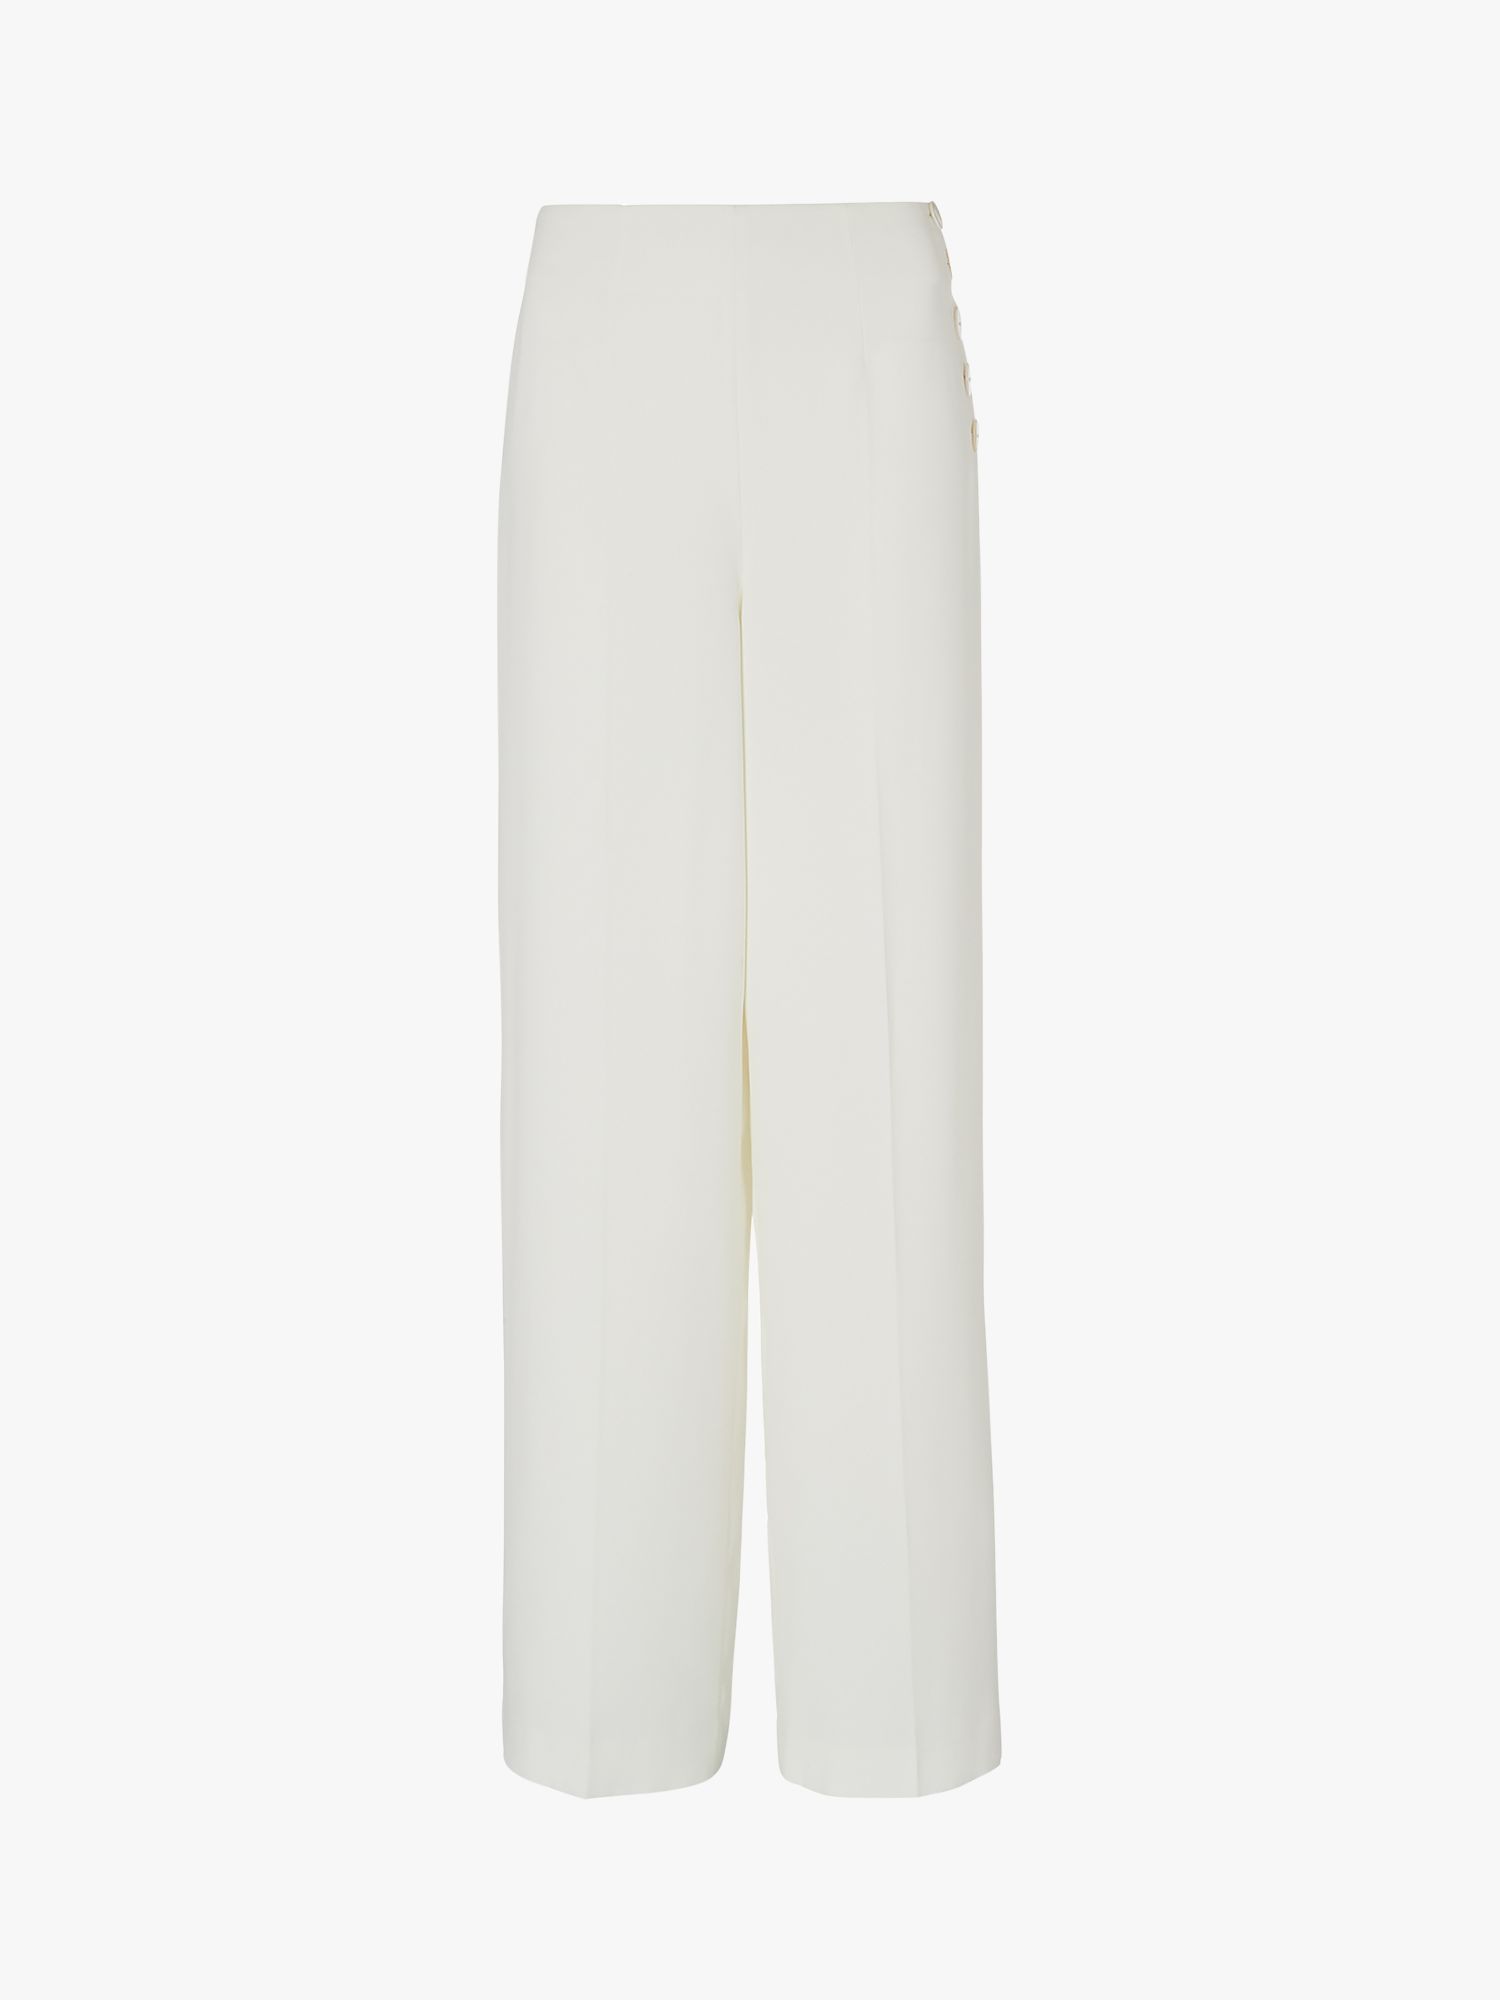 Whistles Annie Button Waist Wedding Trousers, Ivory at John Lewis ...